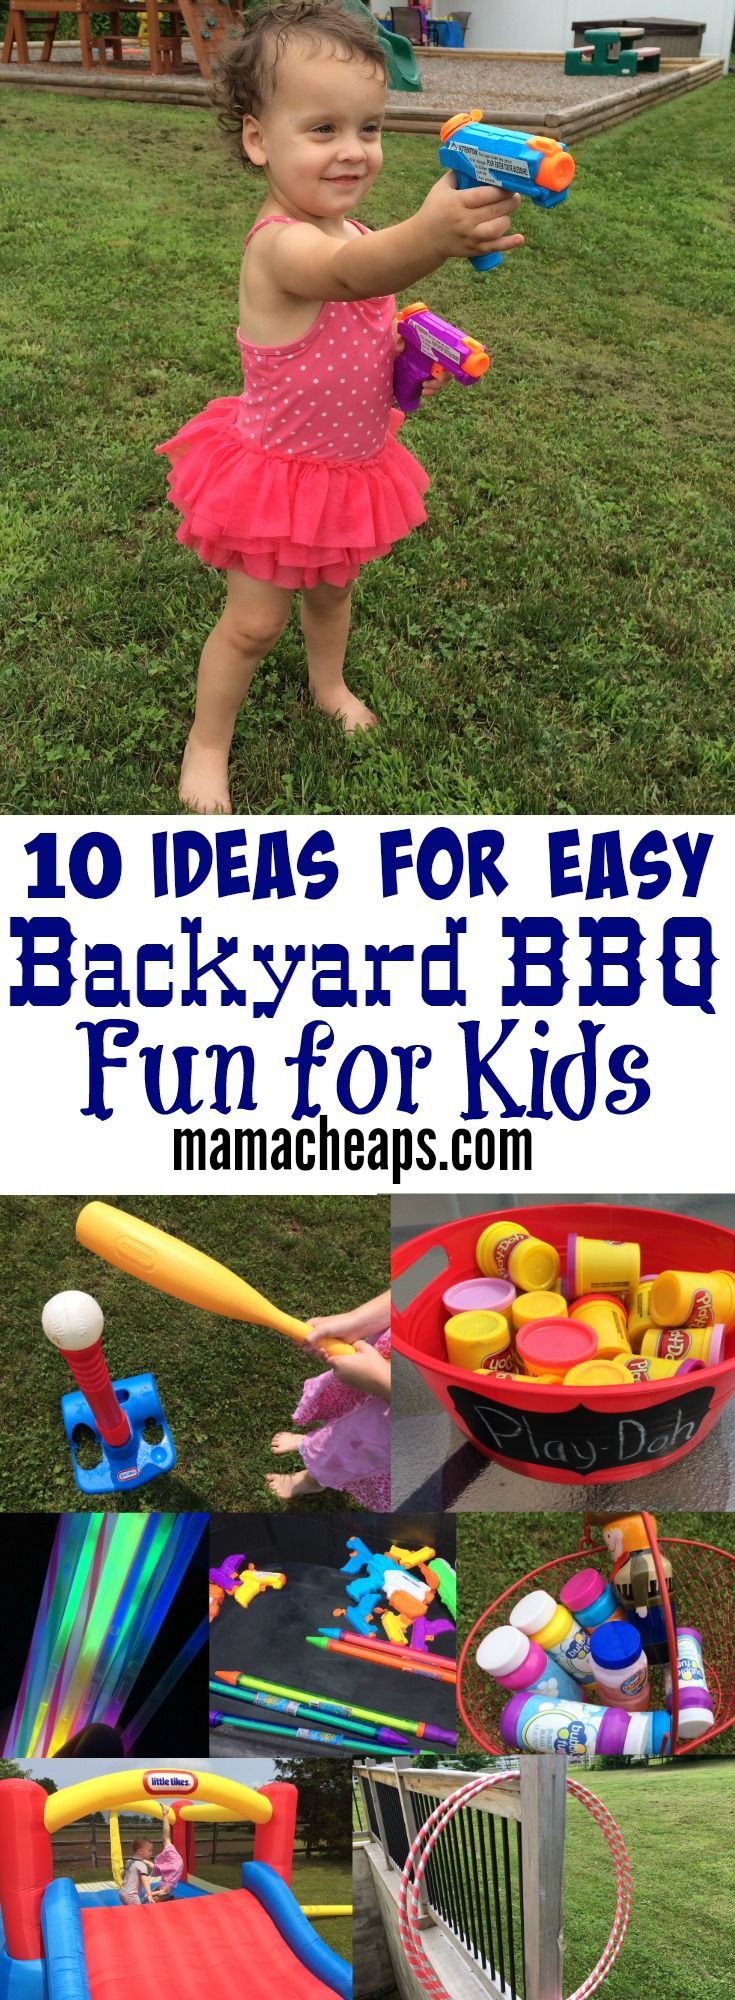 Backyard Party Ideas For Toddlers
 10 Ideas for Easy Backyard BBQ Fun for Kids